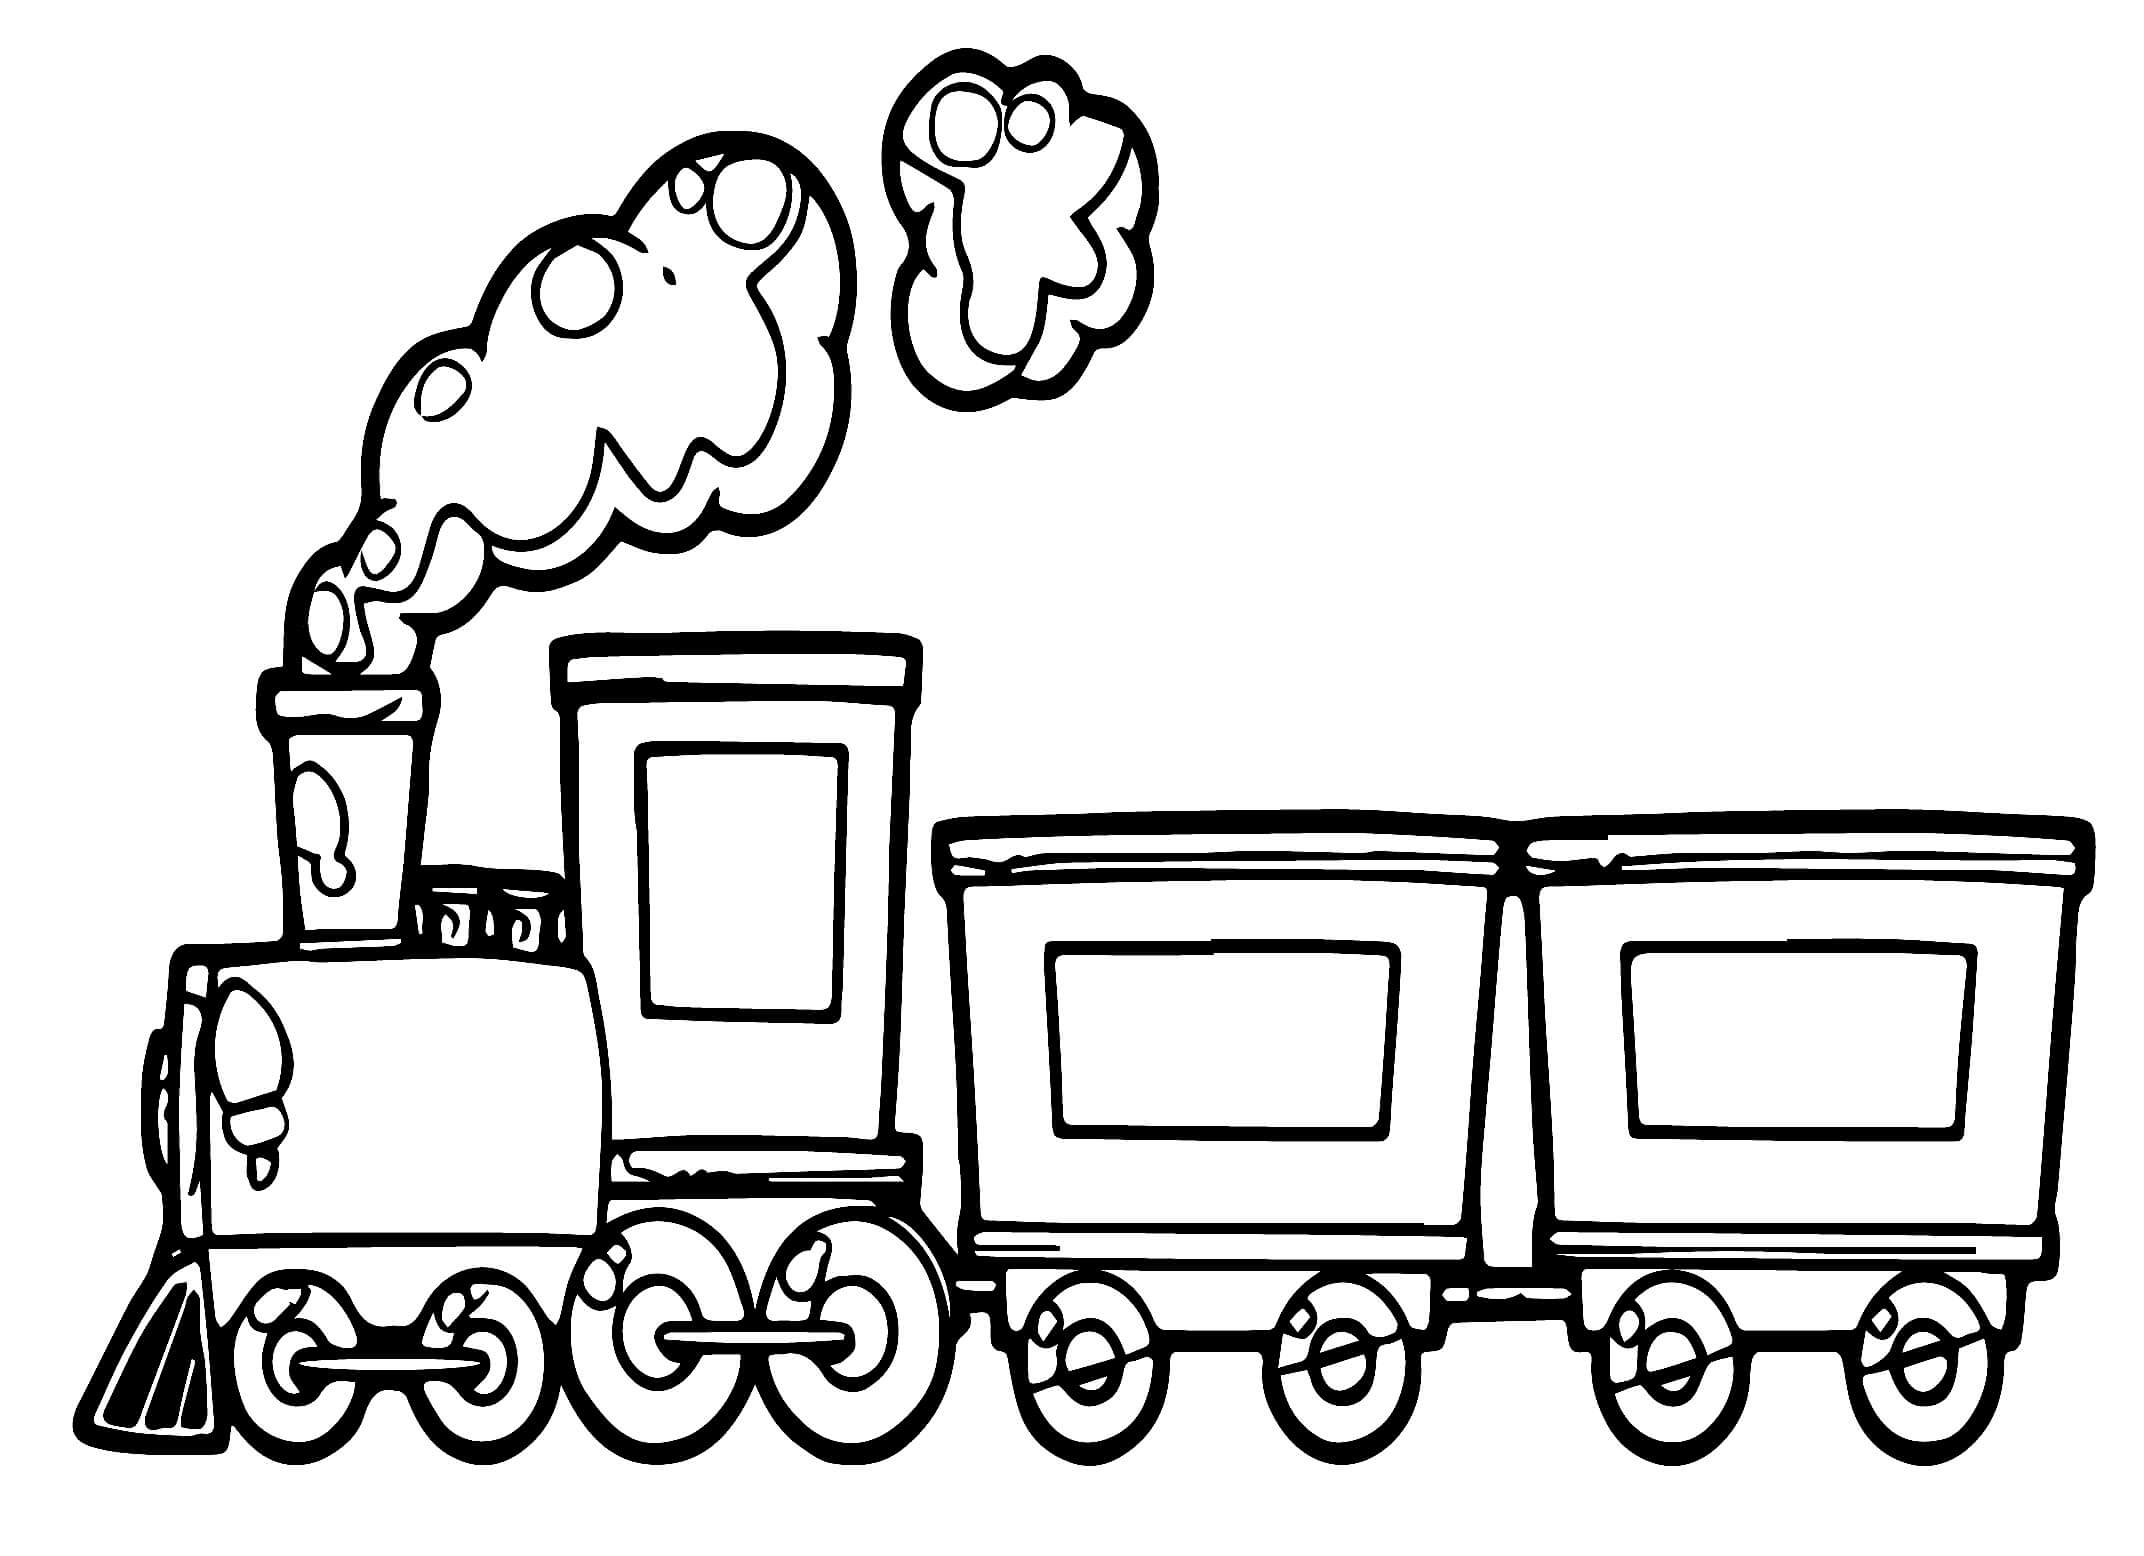 Train 1 coloring page